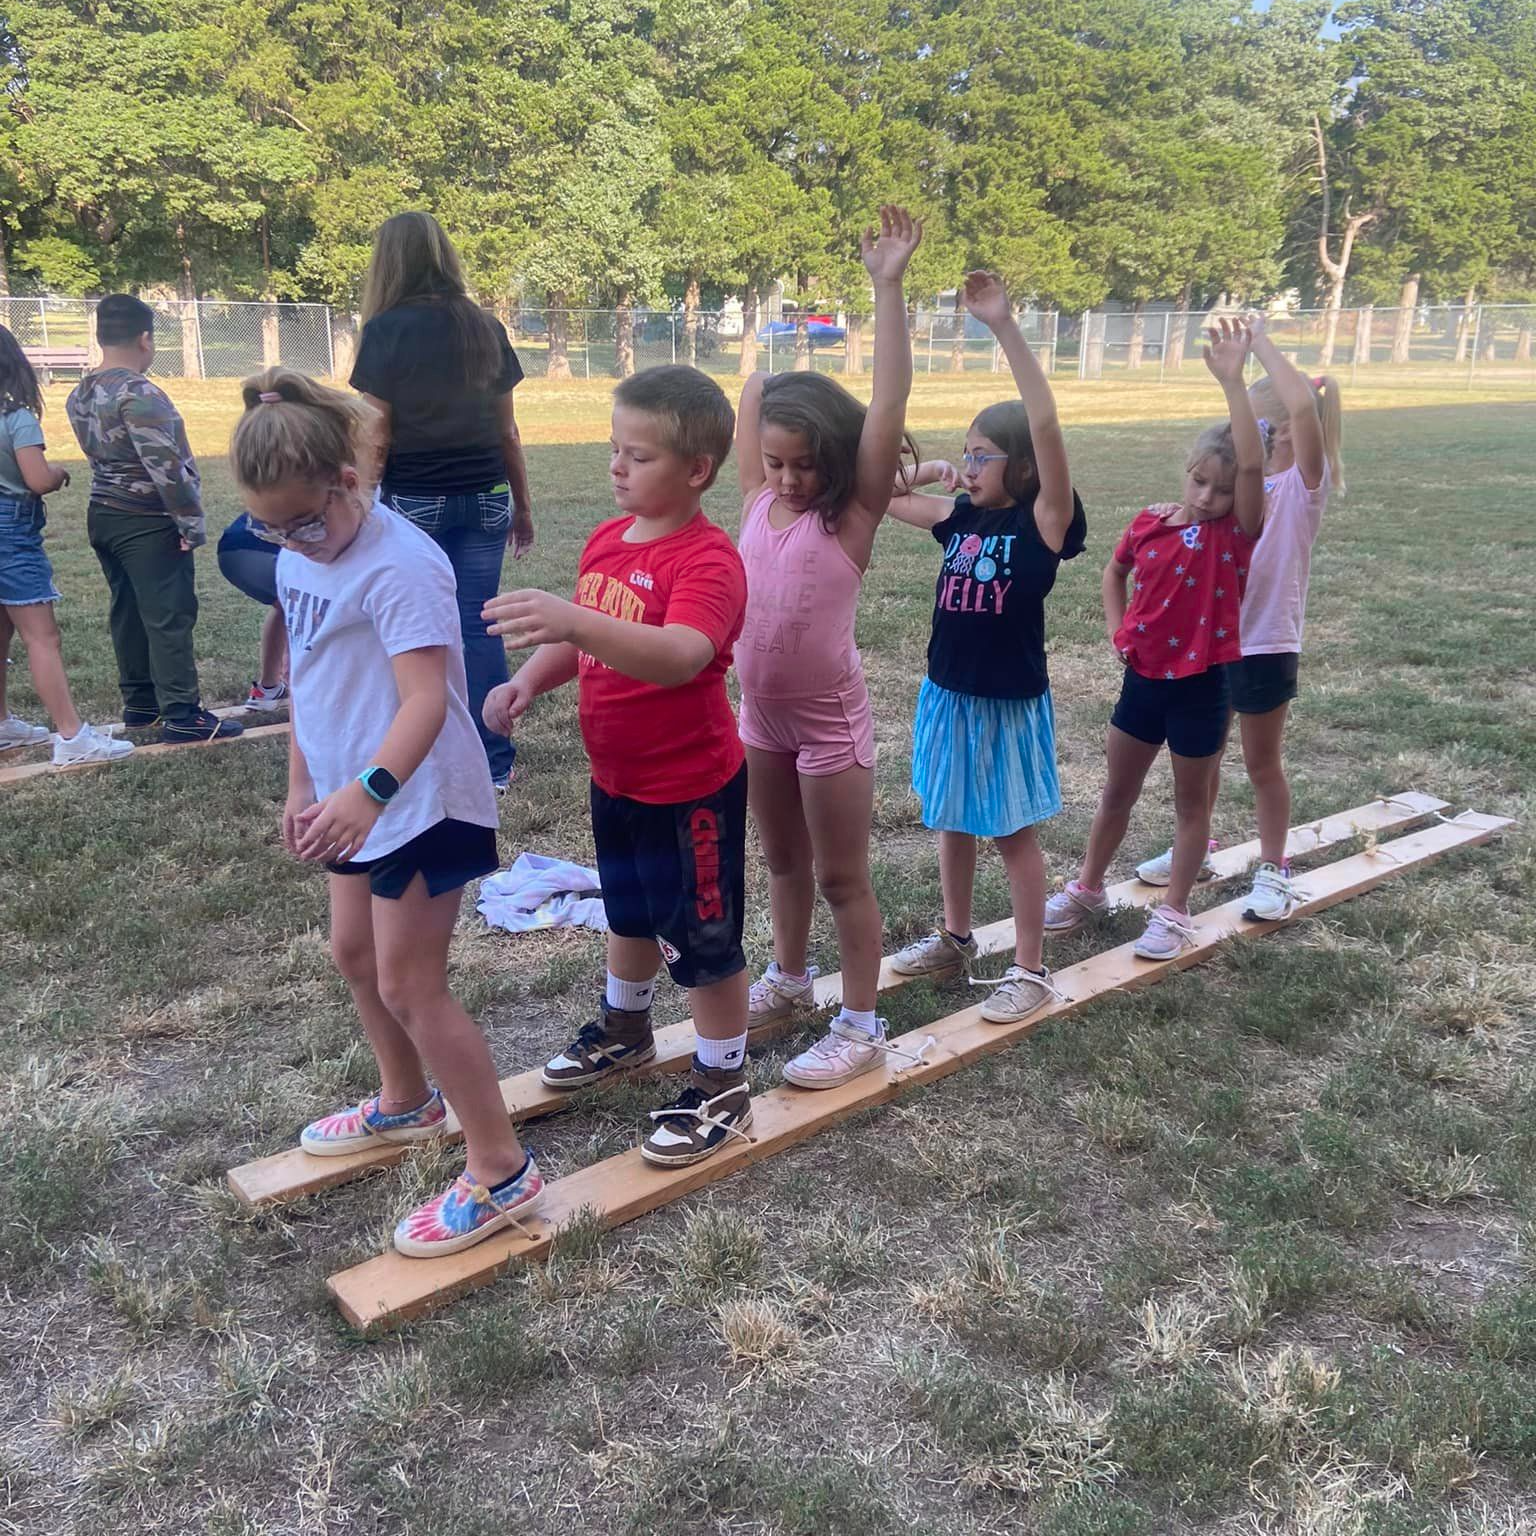 Students working together to move long skis